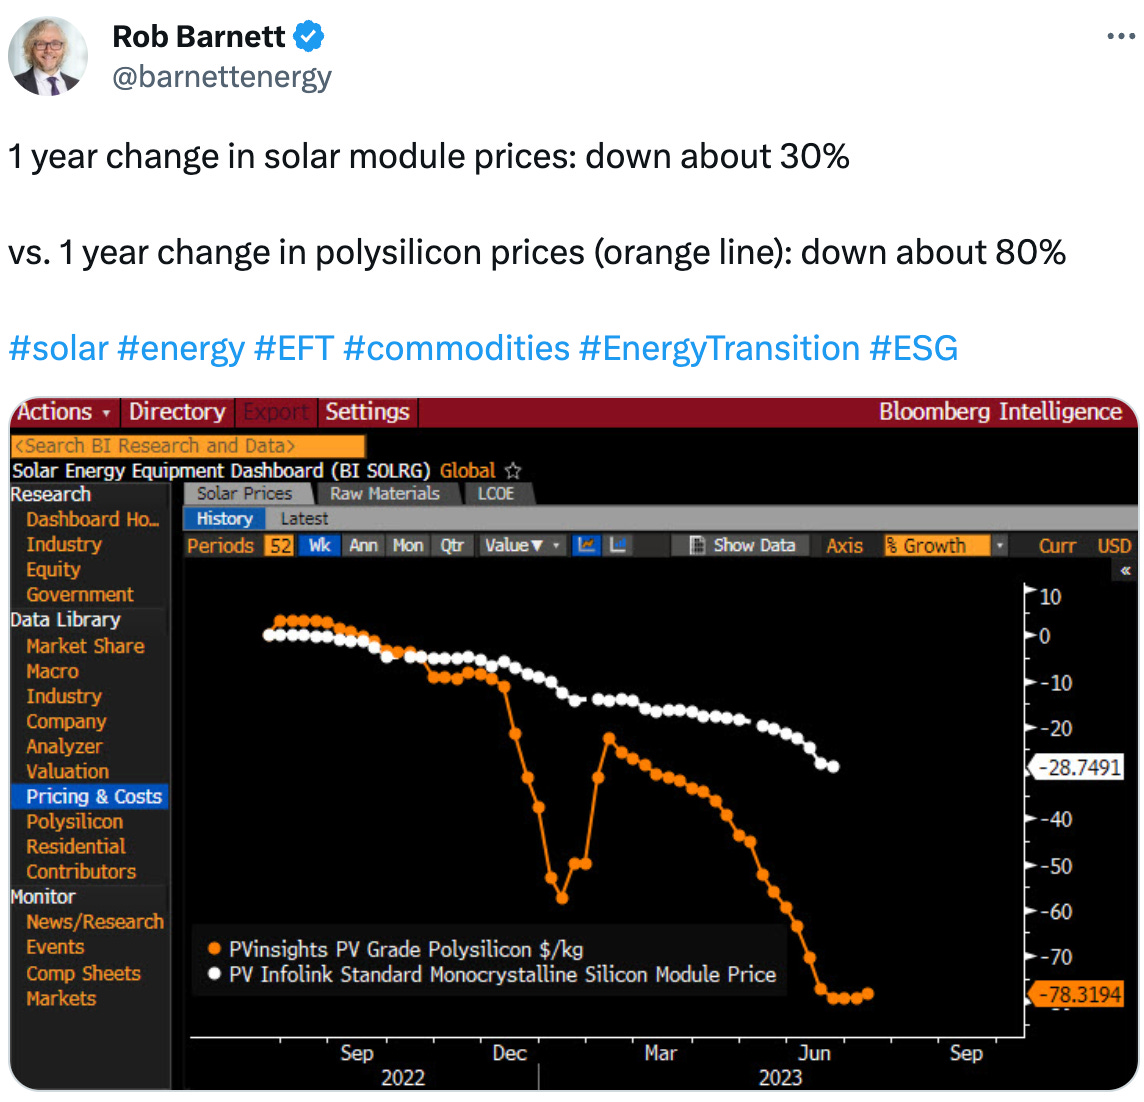  Rob Barnett @barnettenergy 1 year change in solar module prices: down about 30%  vs. 1 year change in polysilicon prices (orange line): down about 80%  #solar #energy #EFT #commodities #EnergyTransition #ESG